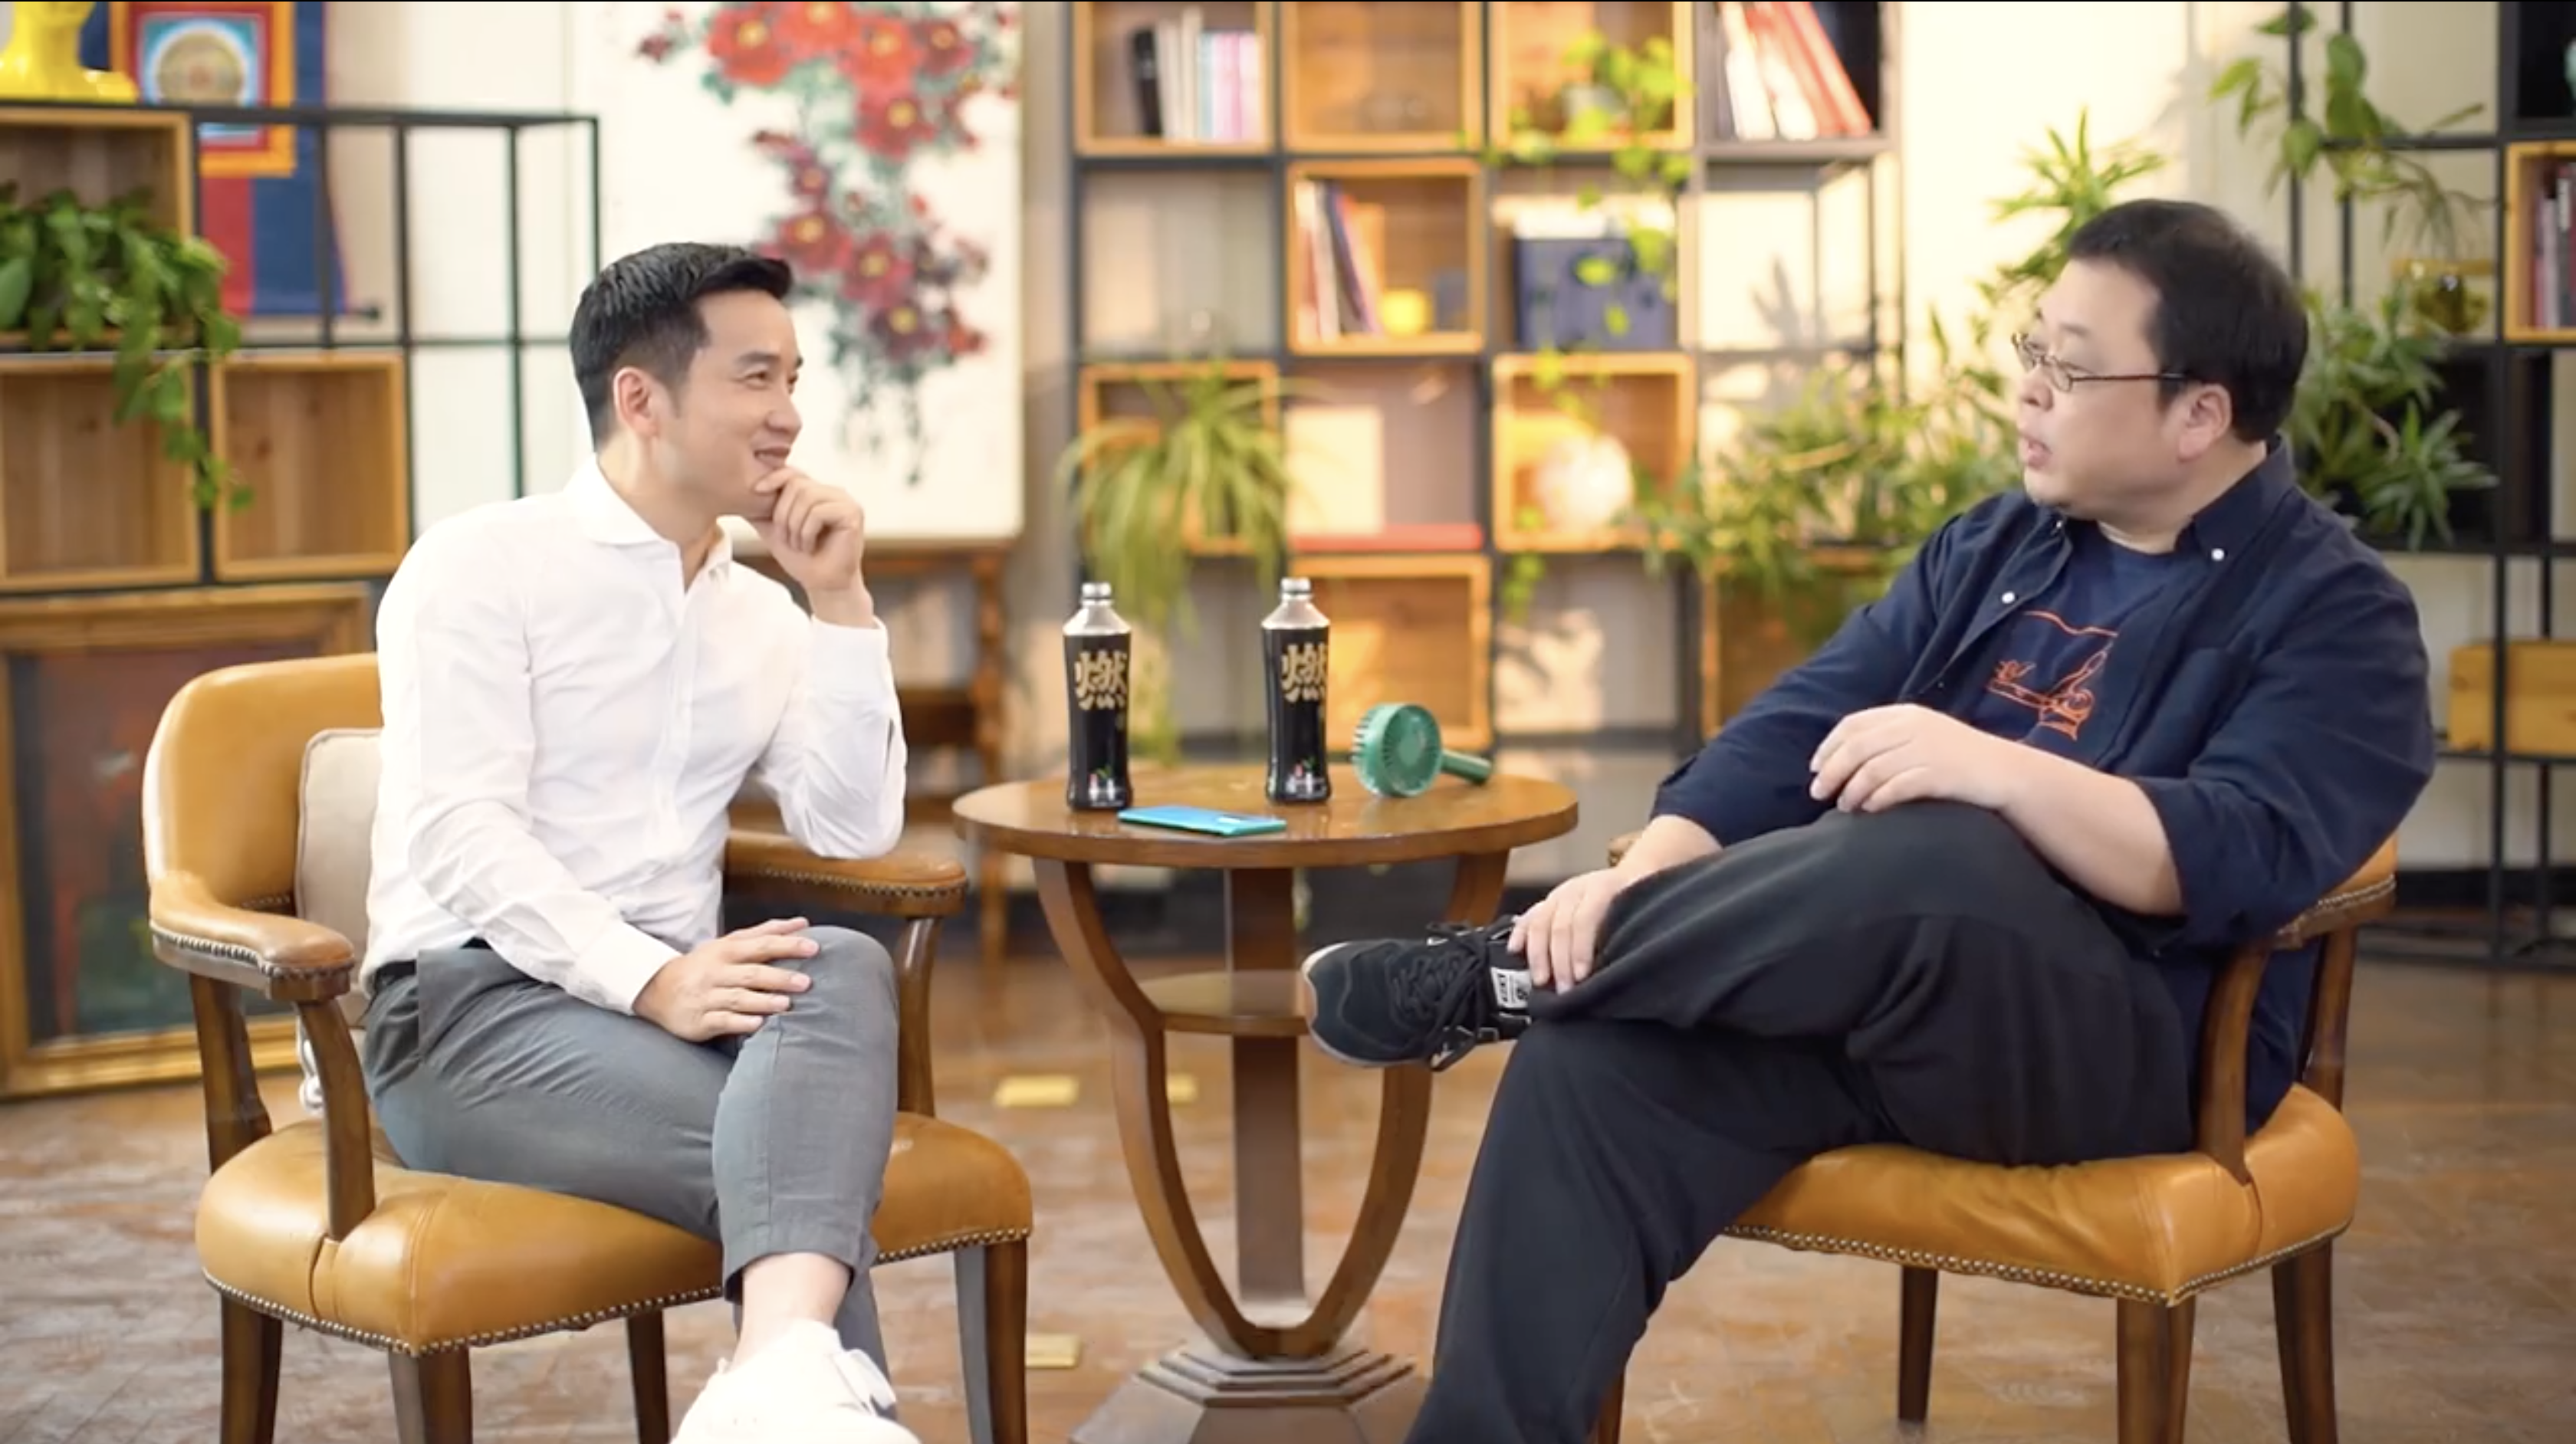 OnePlus CEO Pete Lau in conversation with Smartisan founder Luo Yonghao. (Picture: Luo Yonghao via Weibo)